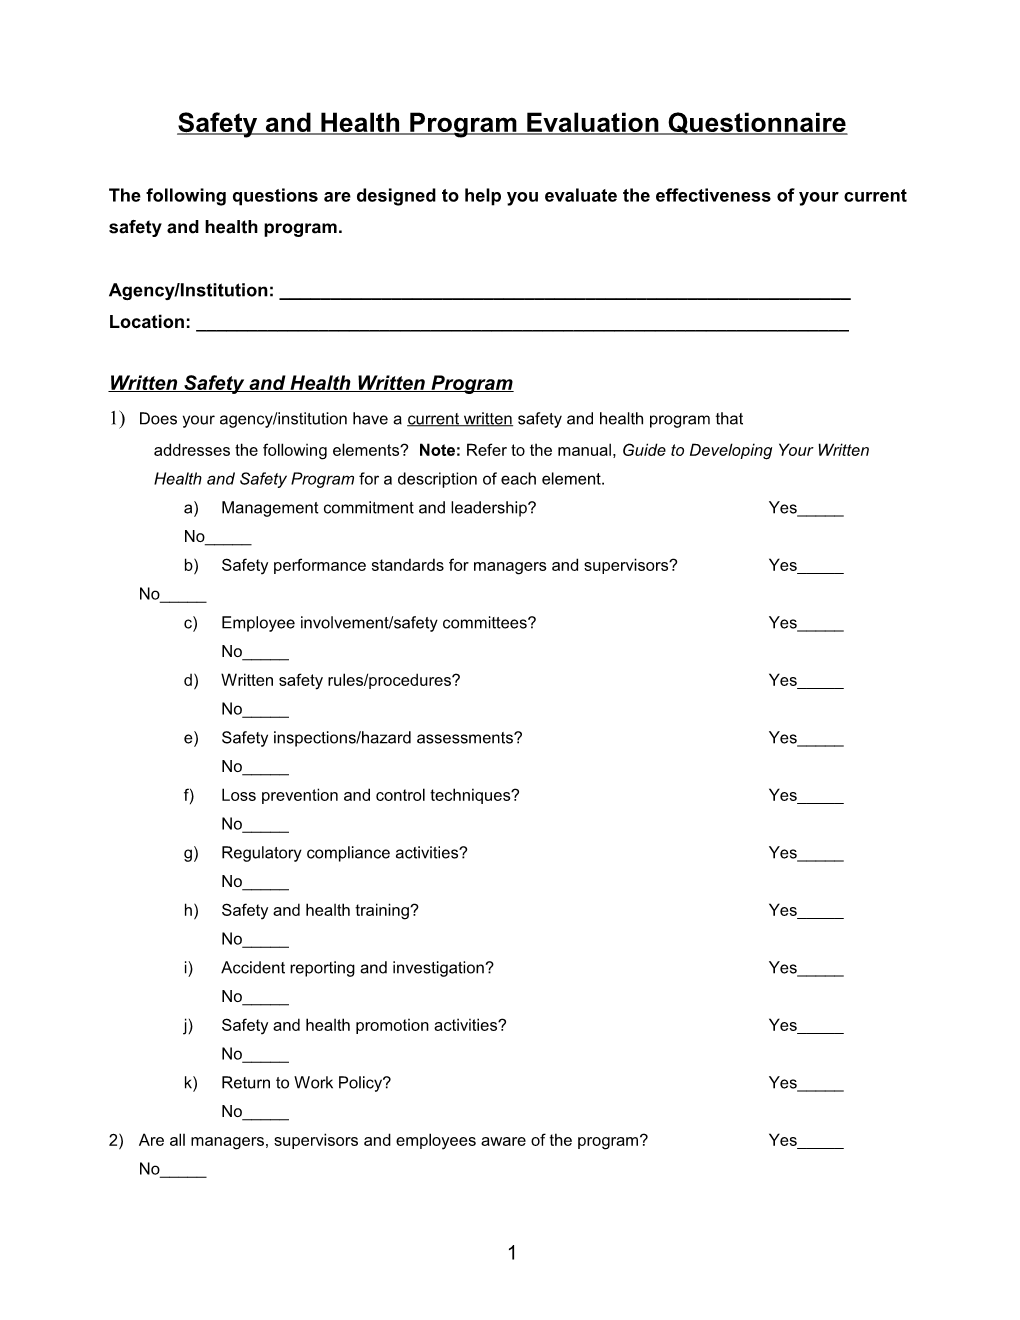 Safety and Health Program Evaluation Questionnaire